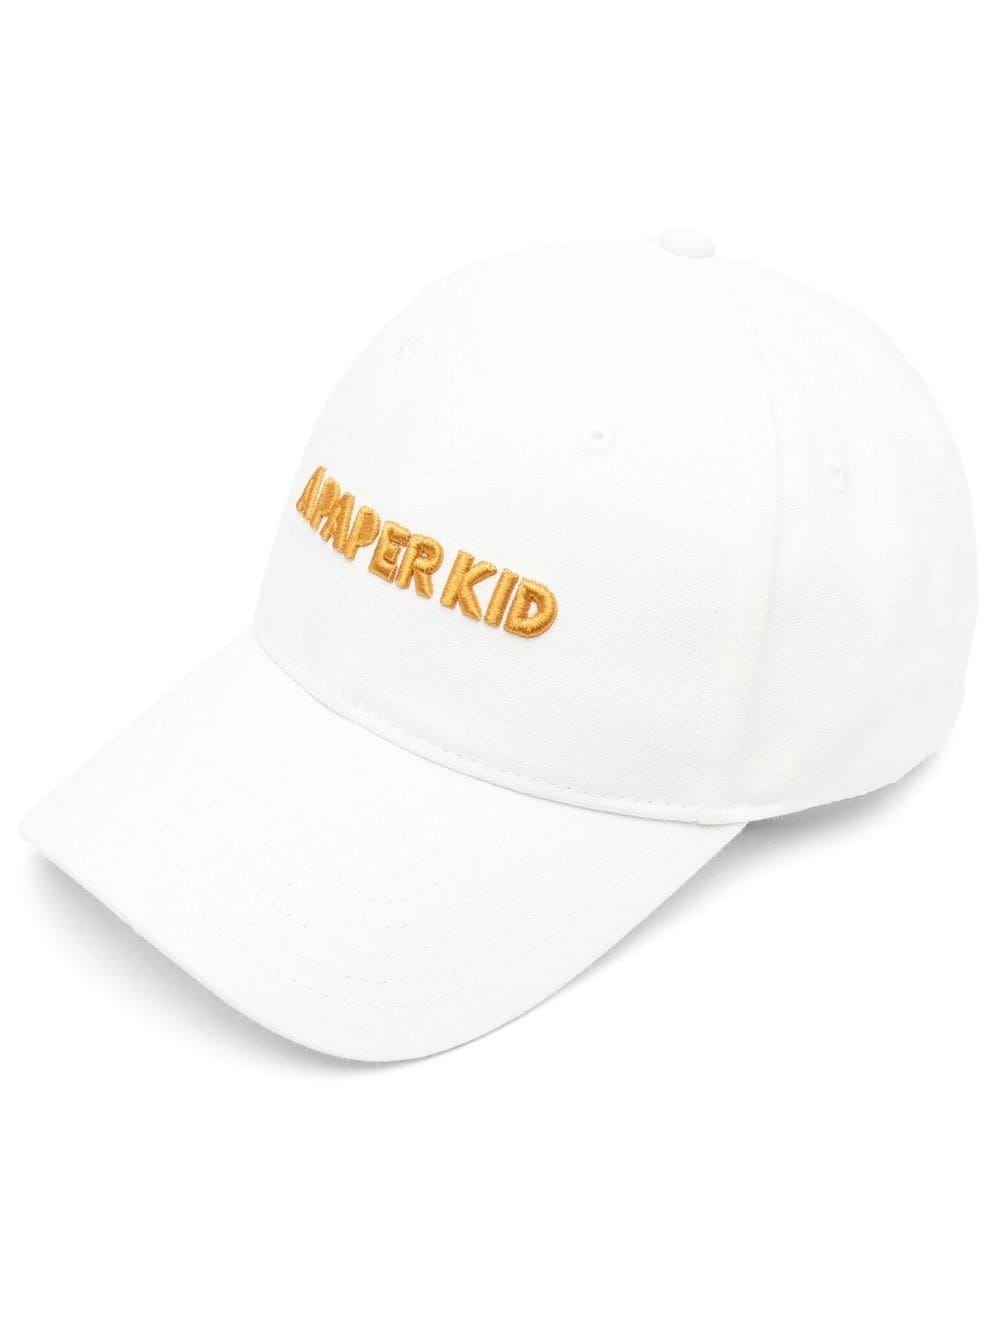 A PAPER KID WHITE BASEBALL CAP WITH EMBROIDERY